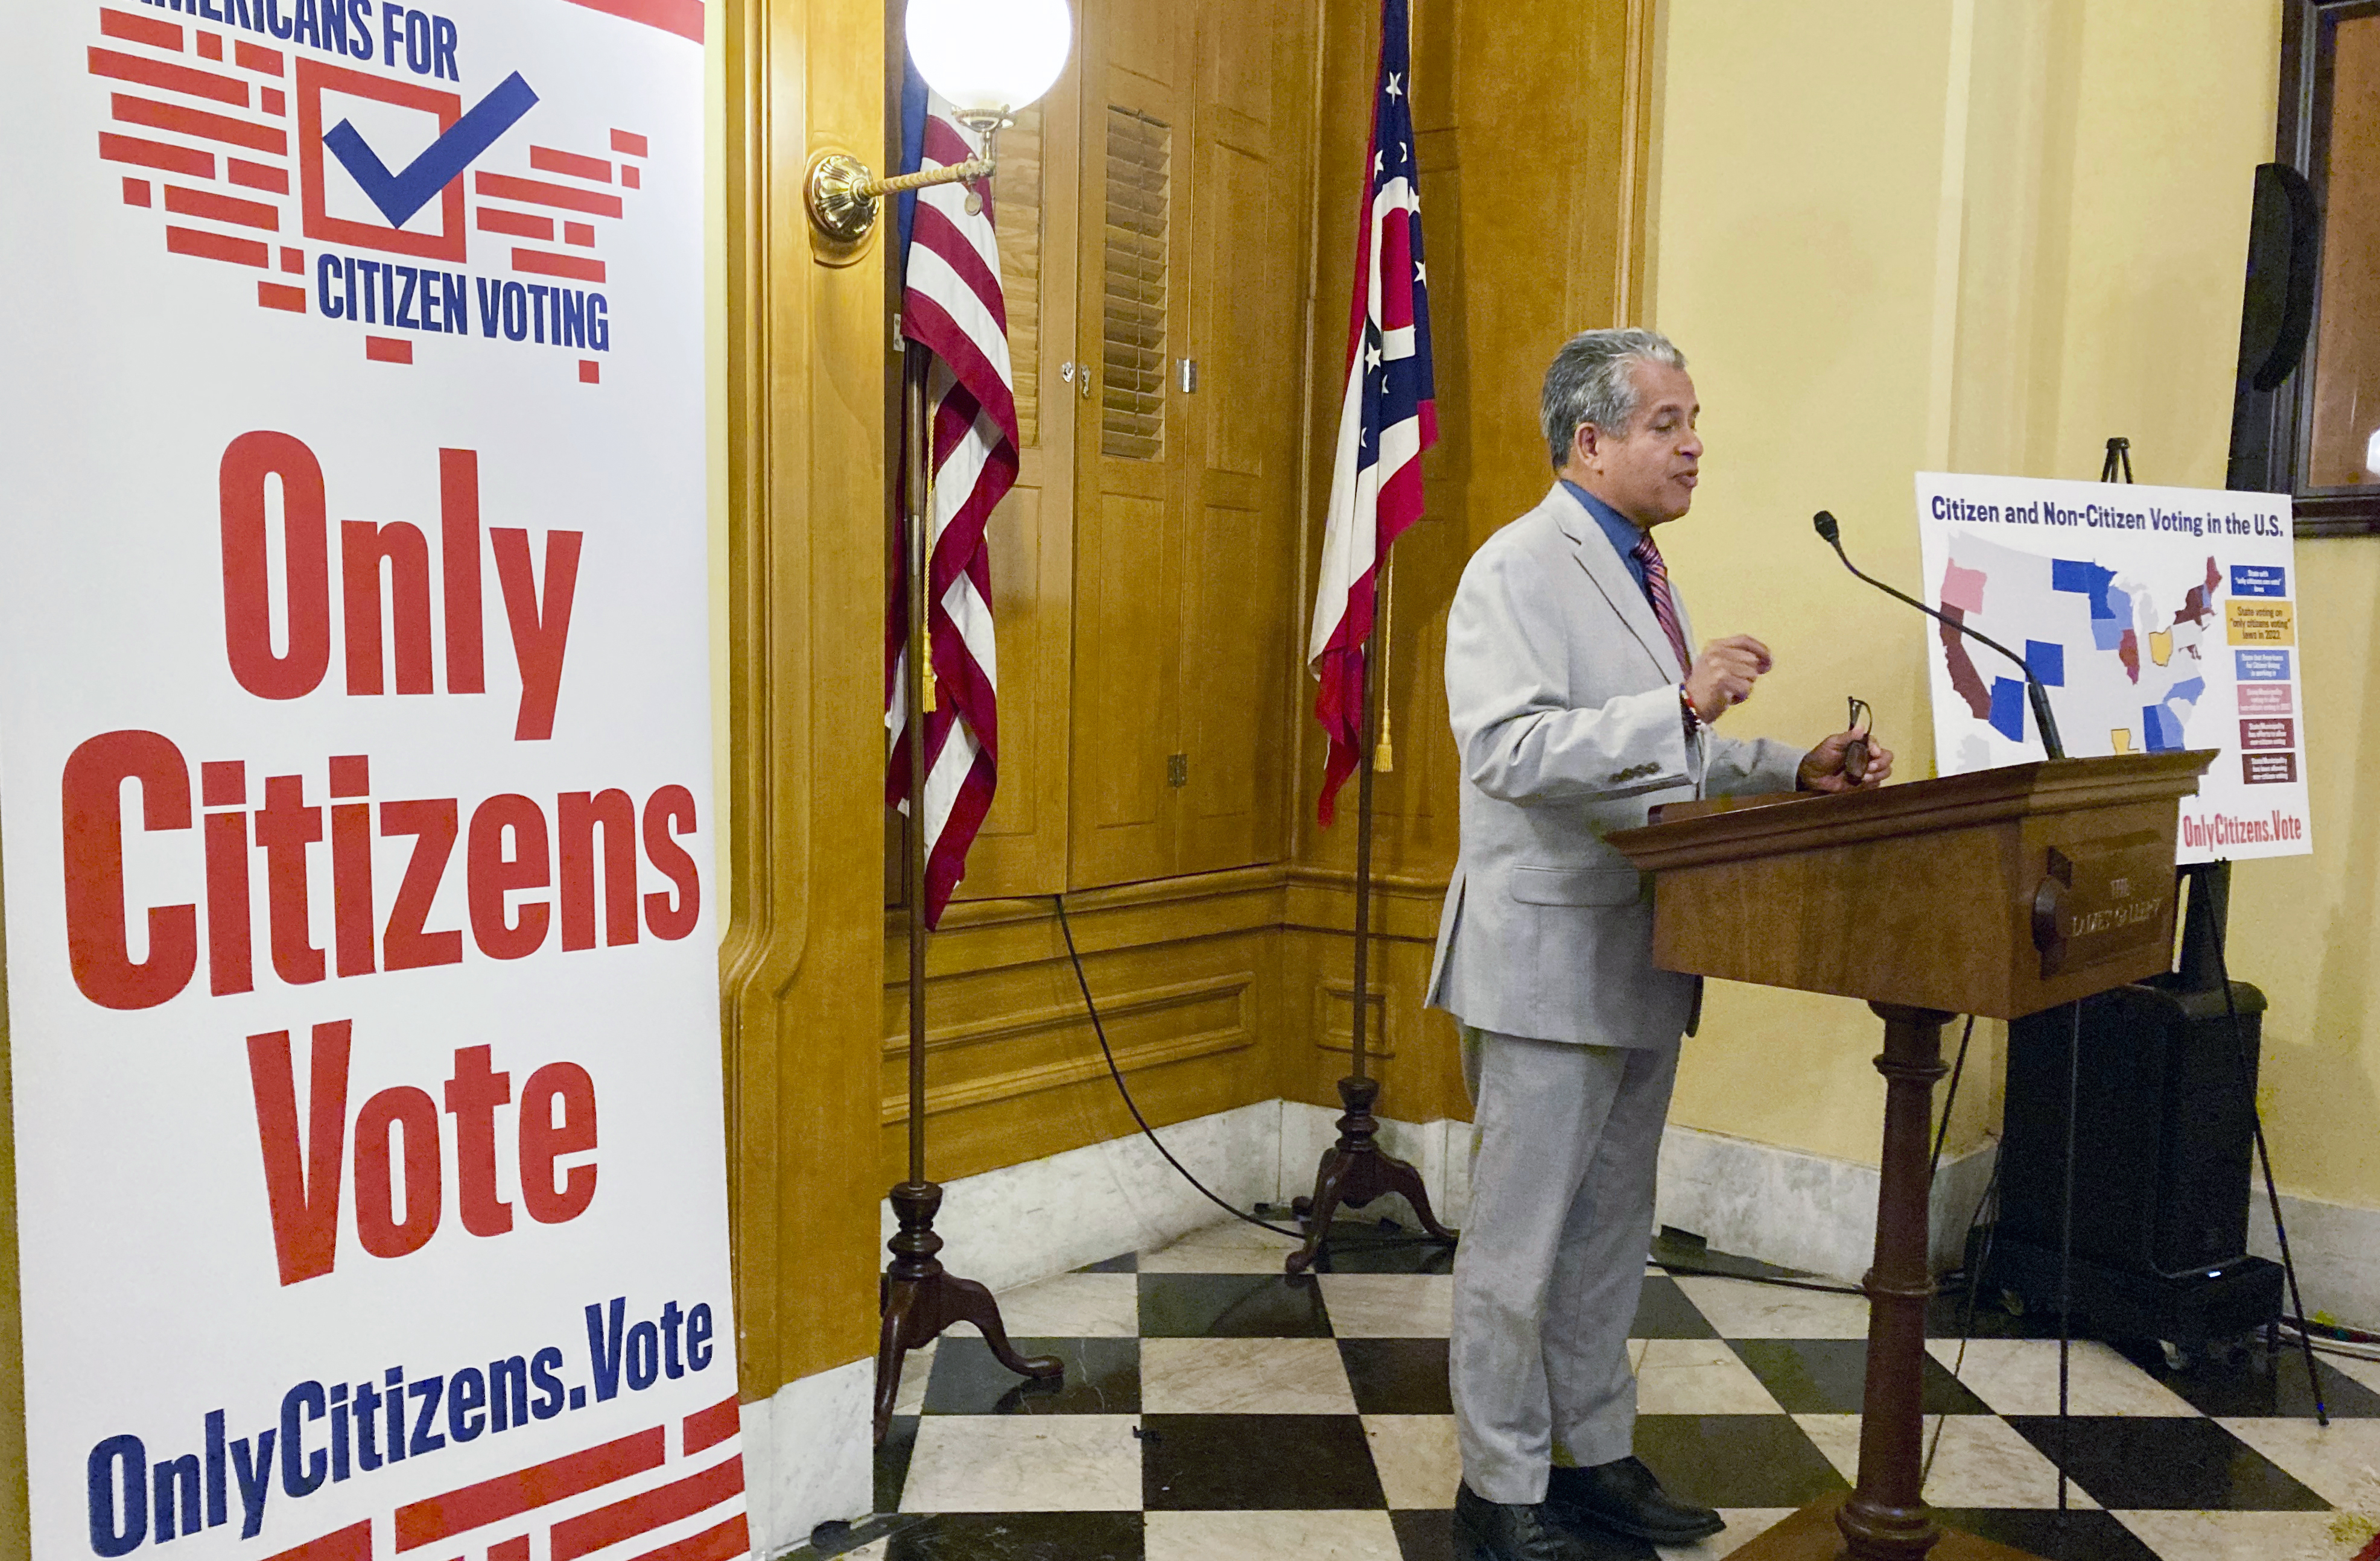 Ohio seeks to become latest state to ban noncitizen voting